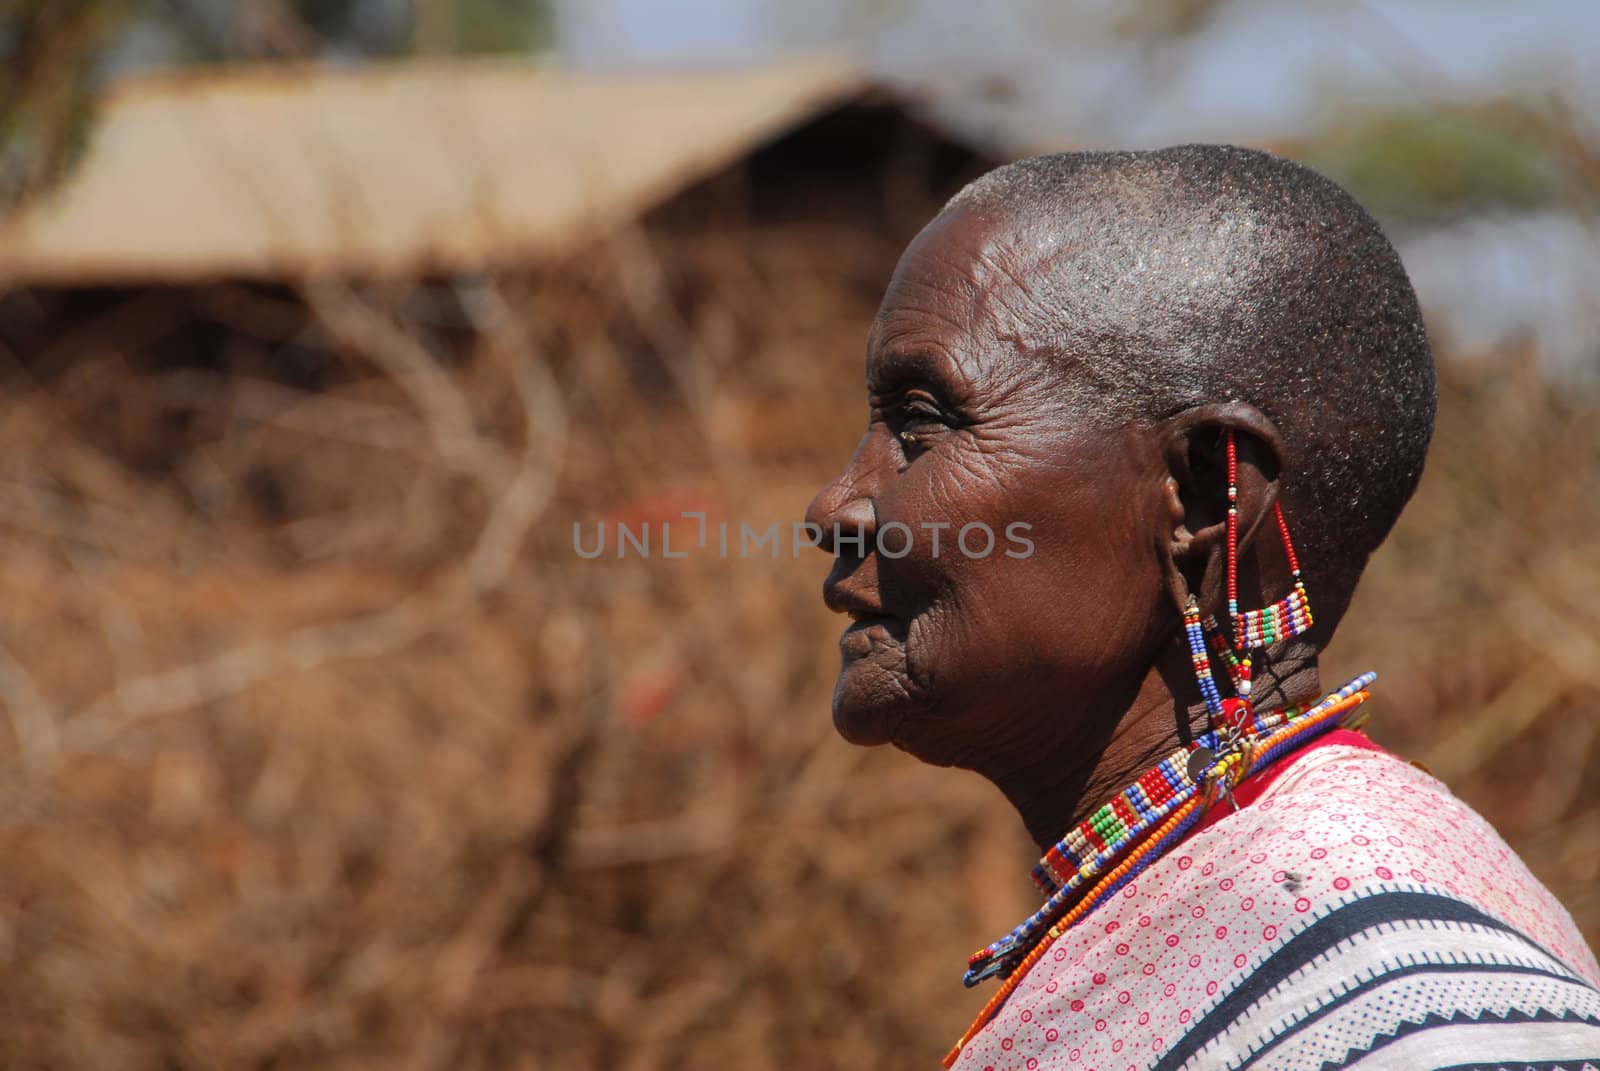 Masai Mara, Kenya July 13, 2009: a old  Masai woman in the bush wearing the typical jewelry forgings of small colored beads.